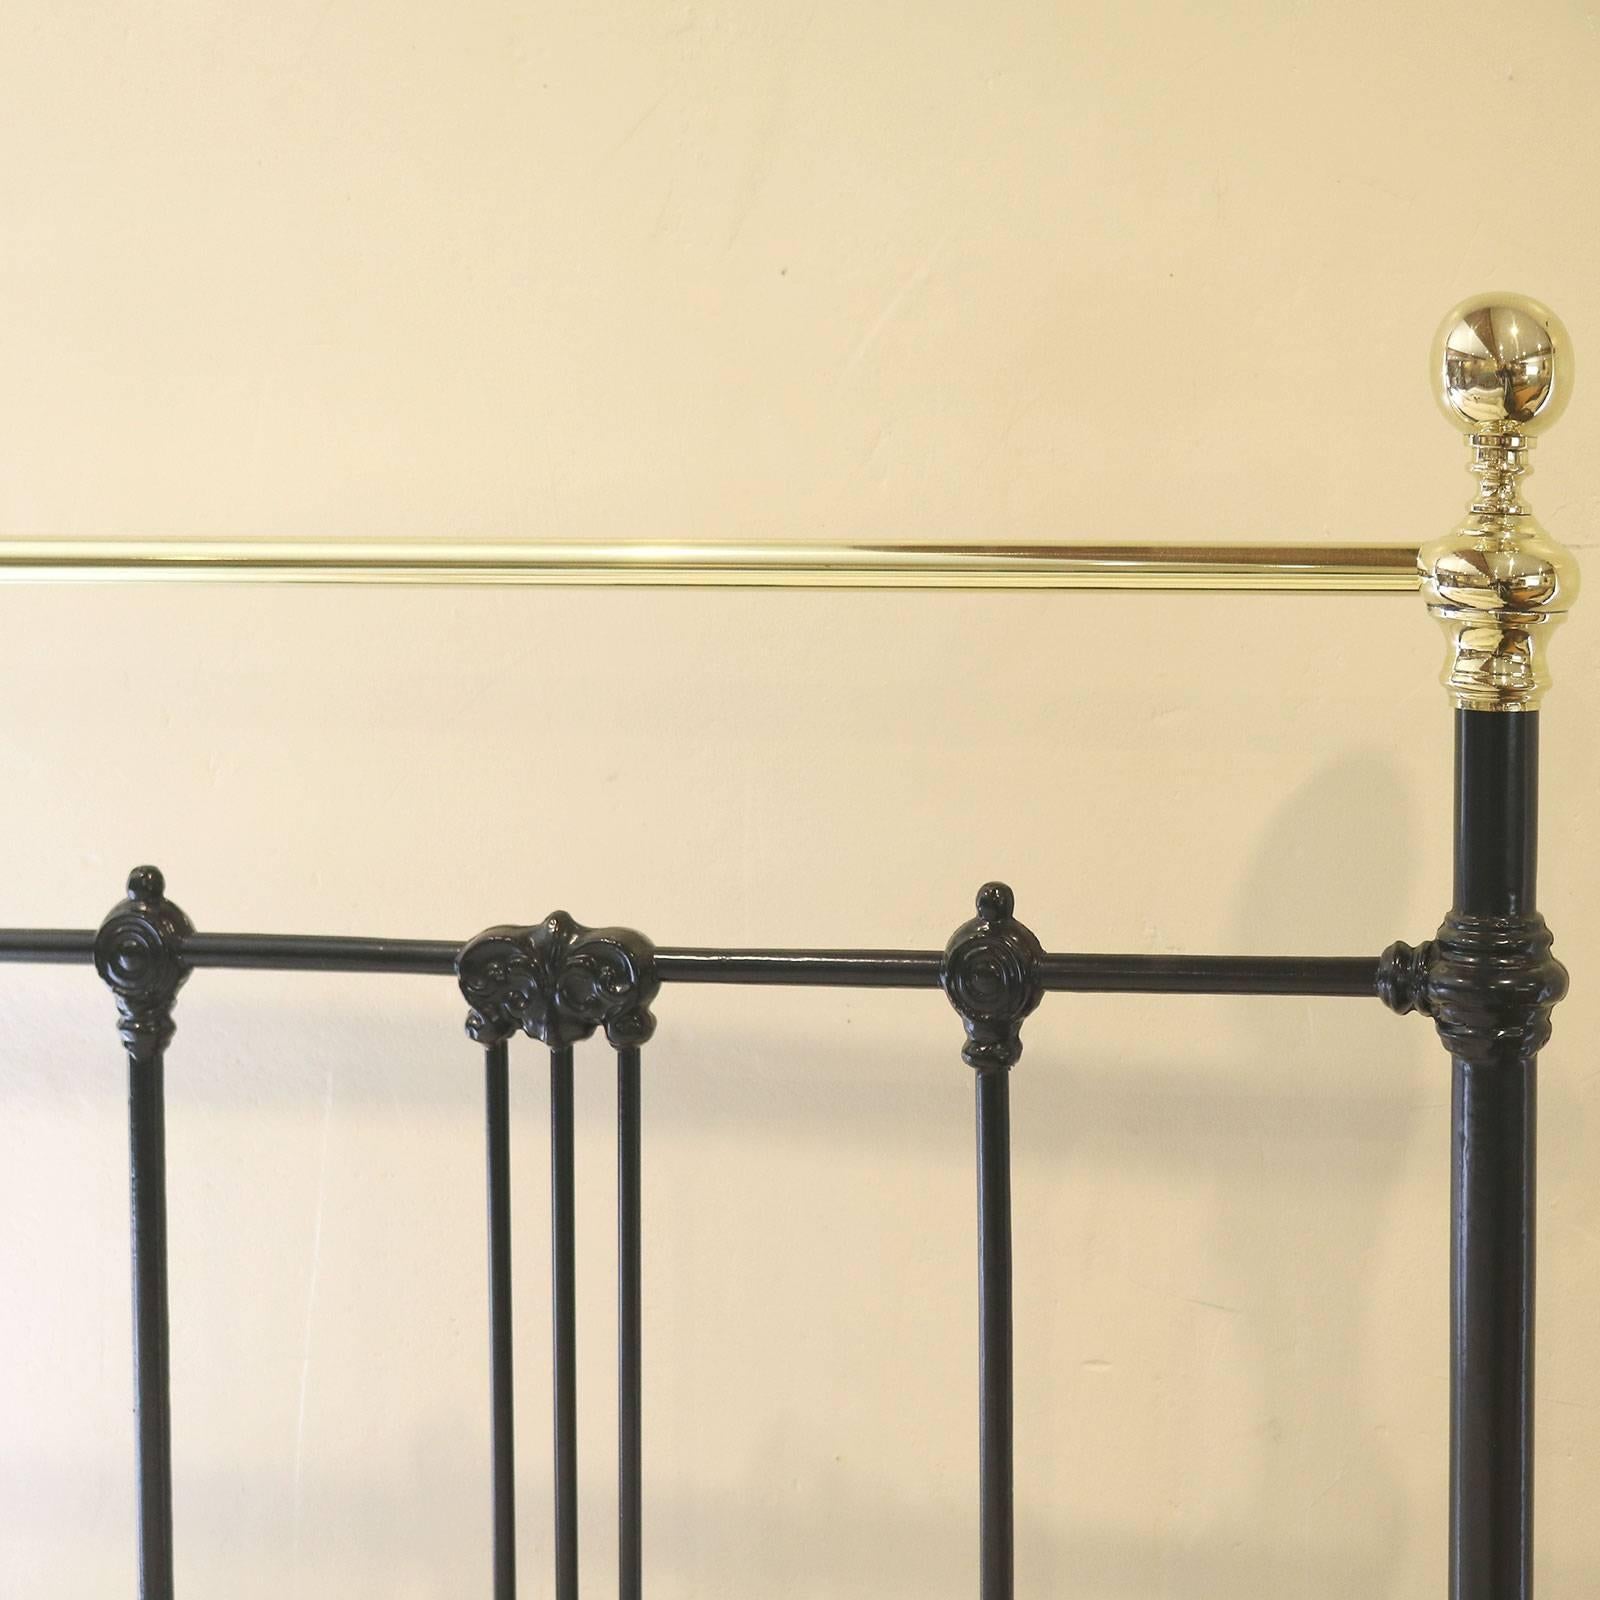 Early 20th Century Brass and Cast Iron Platform Bed MK102